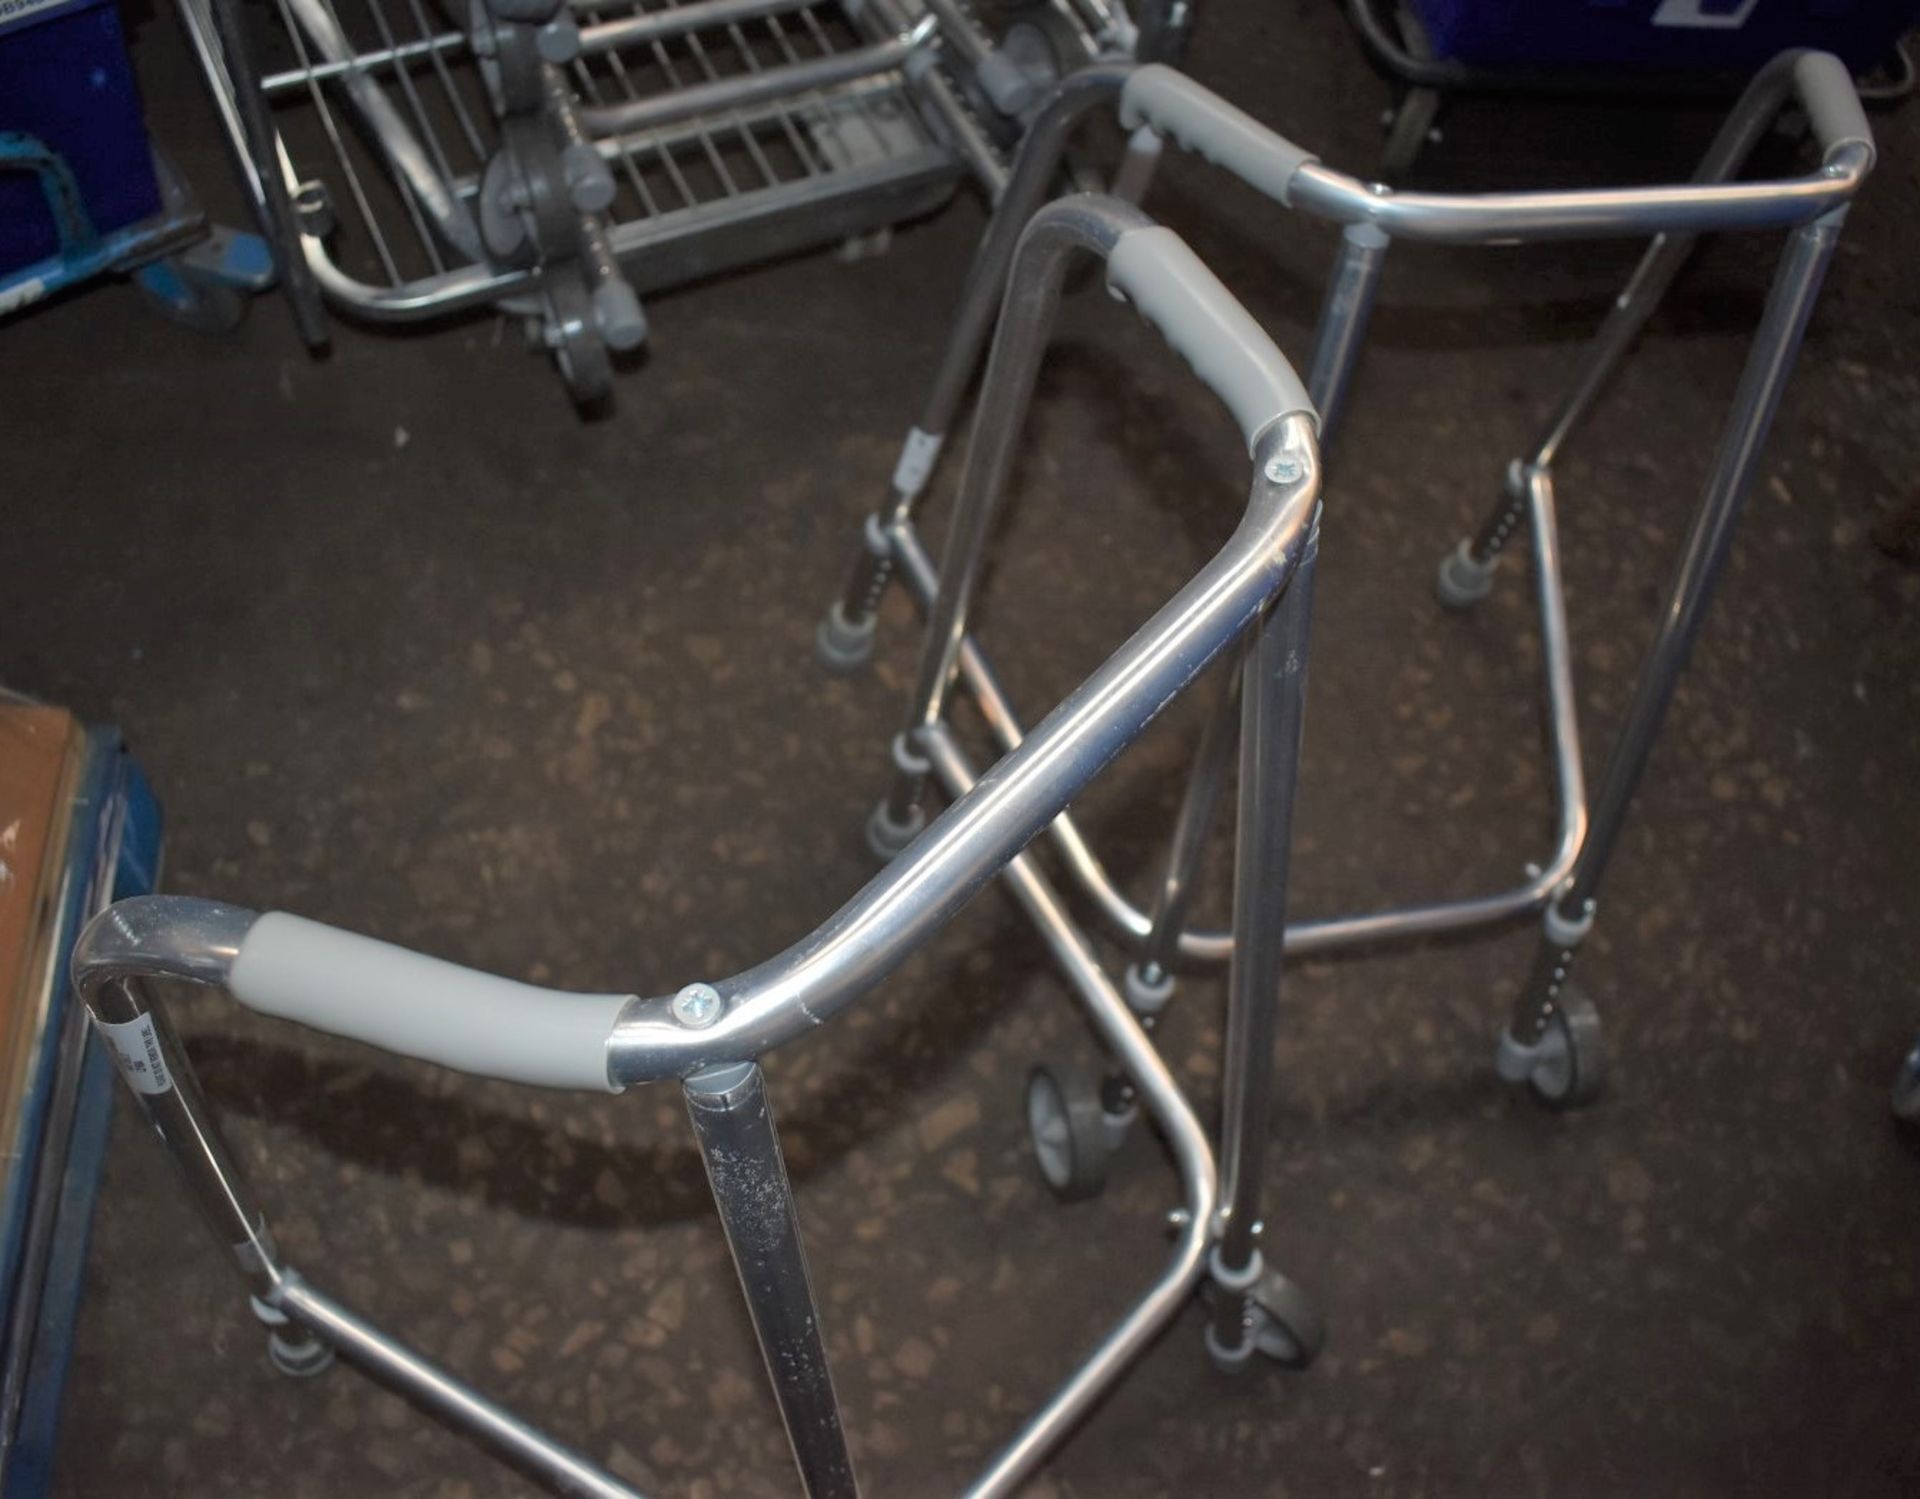 8 x Trulife Walking Aid Frames - Lightweight - Model RM563373 - Provided in Good Condition - - Image 2 of 4